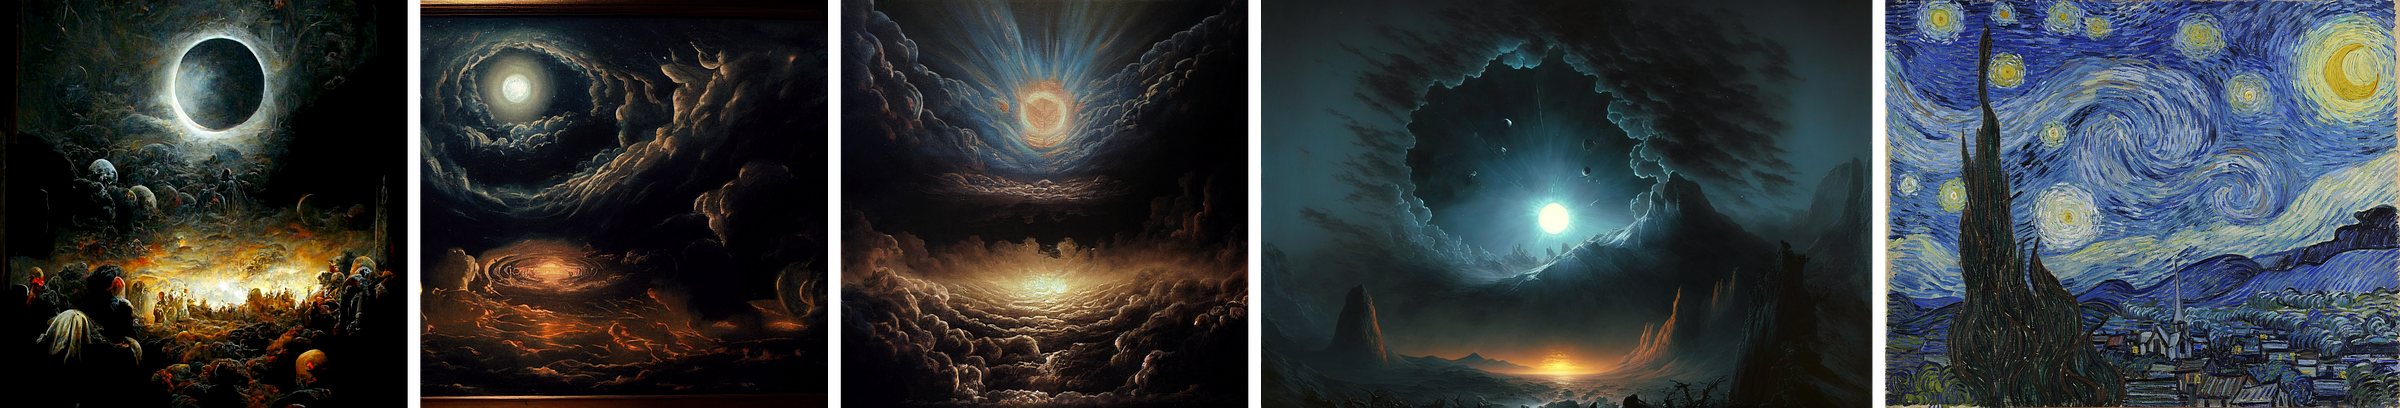 Four images of the moon in ominous, cloudy, and dark night skies, and a fifth image of a bright blue painting: 1) The moon with a thin halo, as if during an eclipse. People crowd around a pool of bright yellow light. Dark figures merge with the clouds. 2) Silvery clouds encircle the moon. More clouds encircle a faint setting sun, billowing clouds are lit from behind in its yellow light.  3) Light streams from the moon, illuminating the clouds. Below, clouds form a concentric pattern around the reflected face of the moon. 4) The moon set in a circle of clear sky framed by clouds and mountain. In the far distance, a sun is setting or rising. 5) Van Gogh’s The Starry Night. Dark, wavy, cyprus trees extend upward. A small village with a church spire. Gentle hills on the horizon. The highly stylized sky is bold blues, swirling, curling clouds, luminous yellow stars, and crescent moon, painted with short, distinct brushstrokes flowing along curling paths creating a dreamlike sense of movement and vibrancy. 